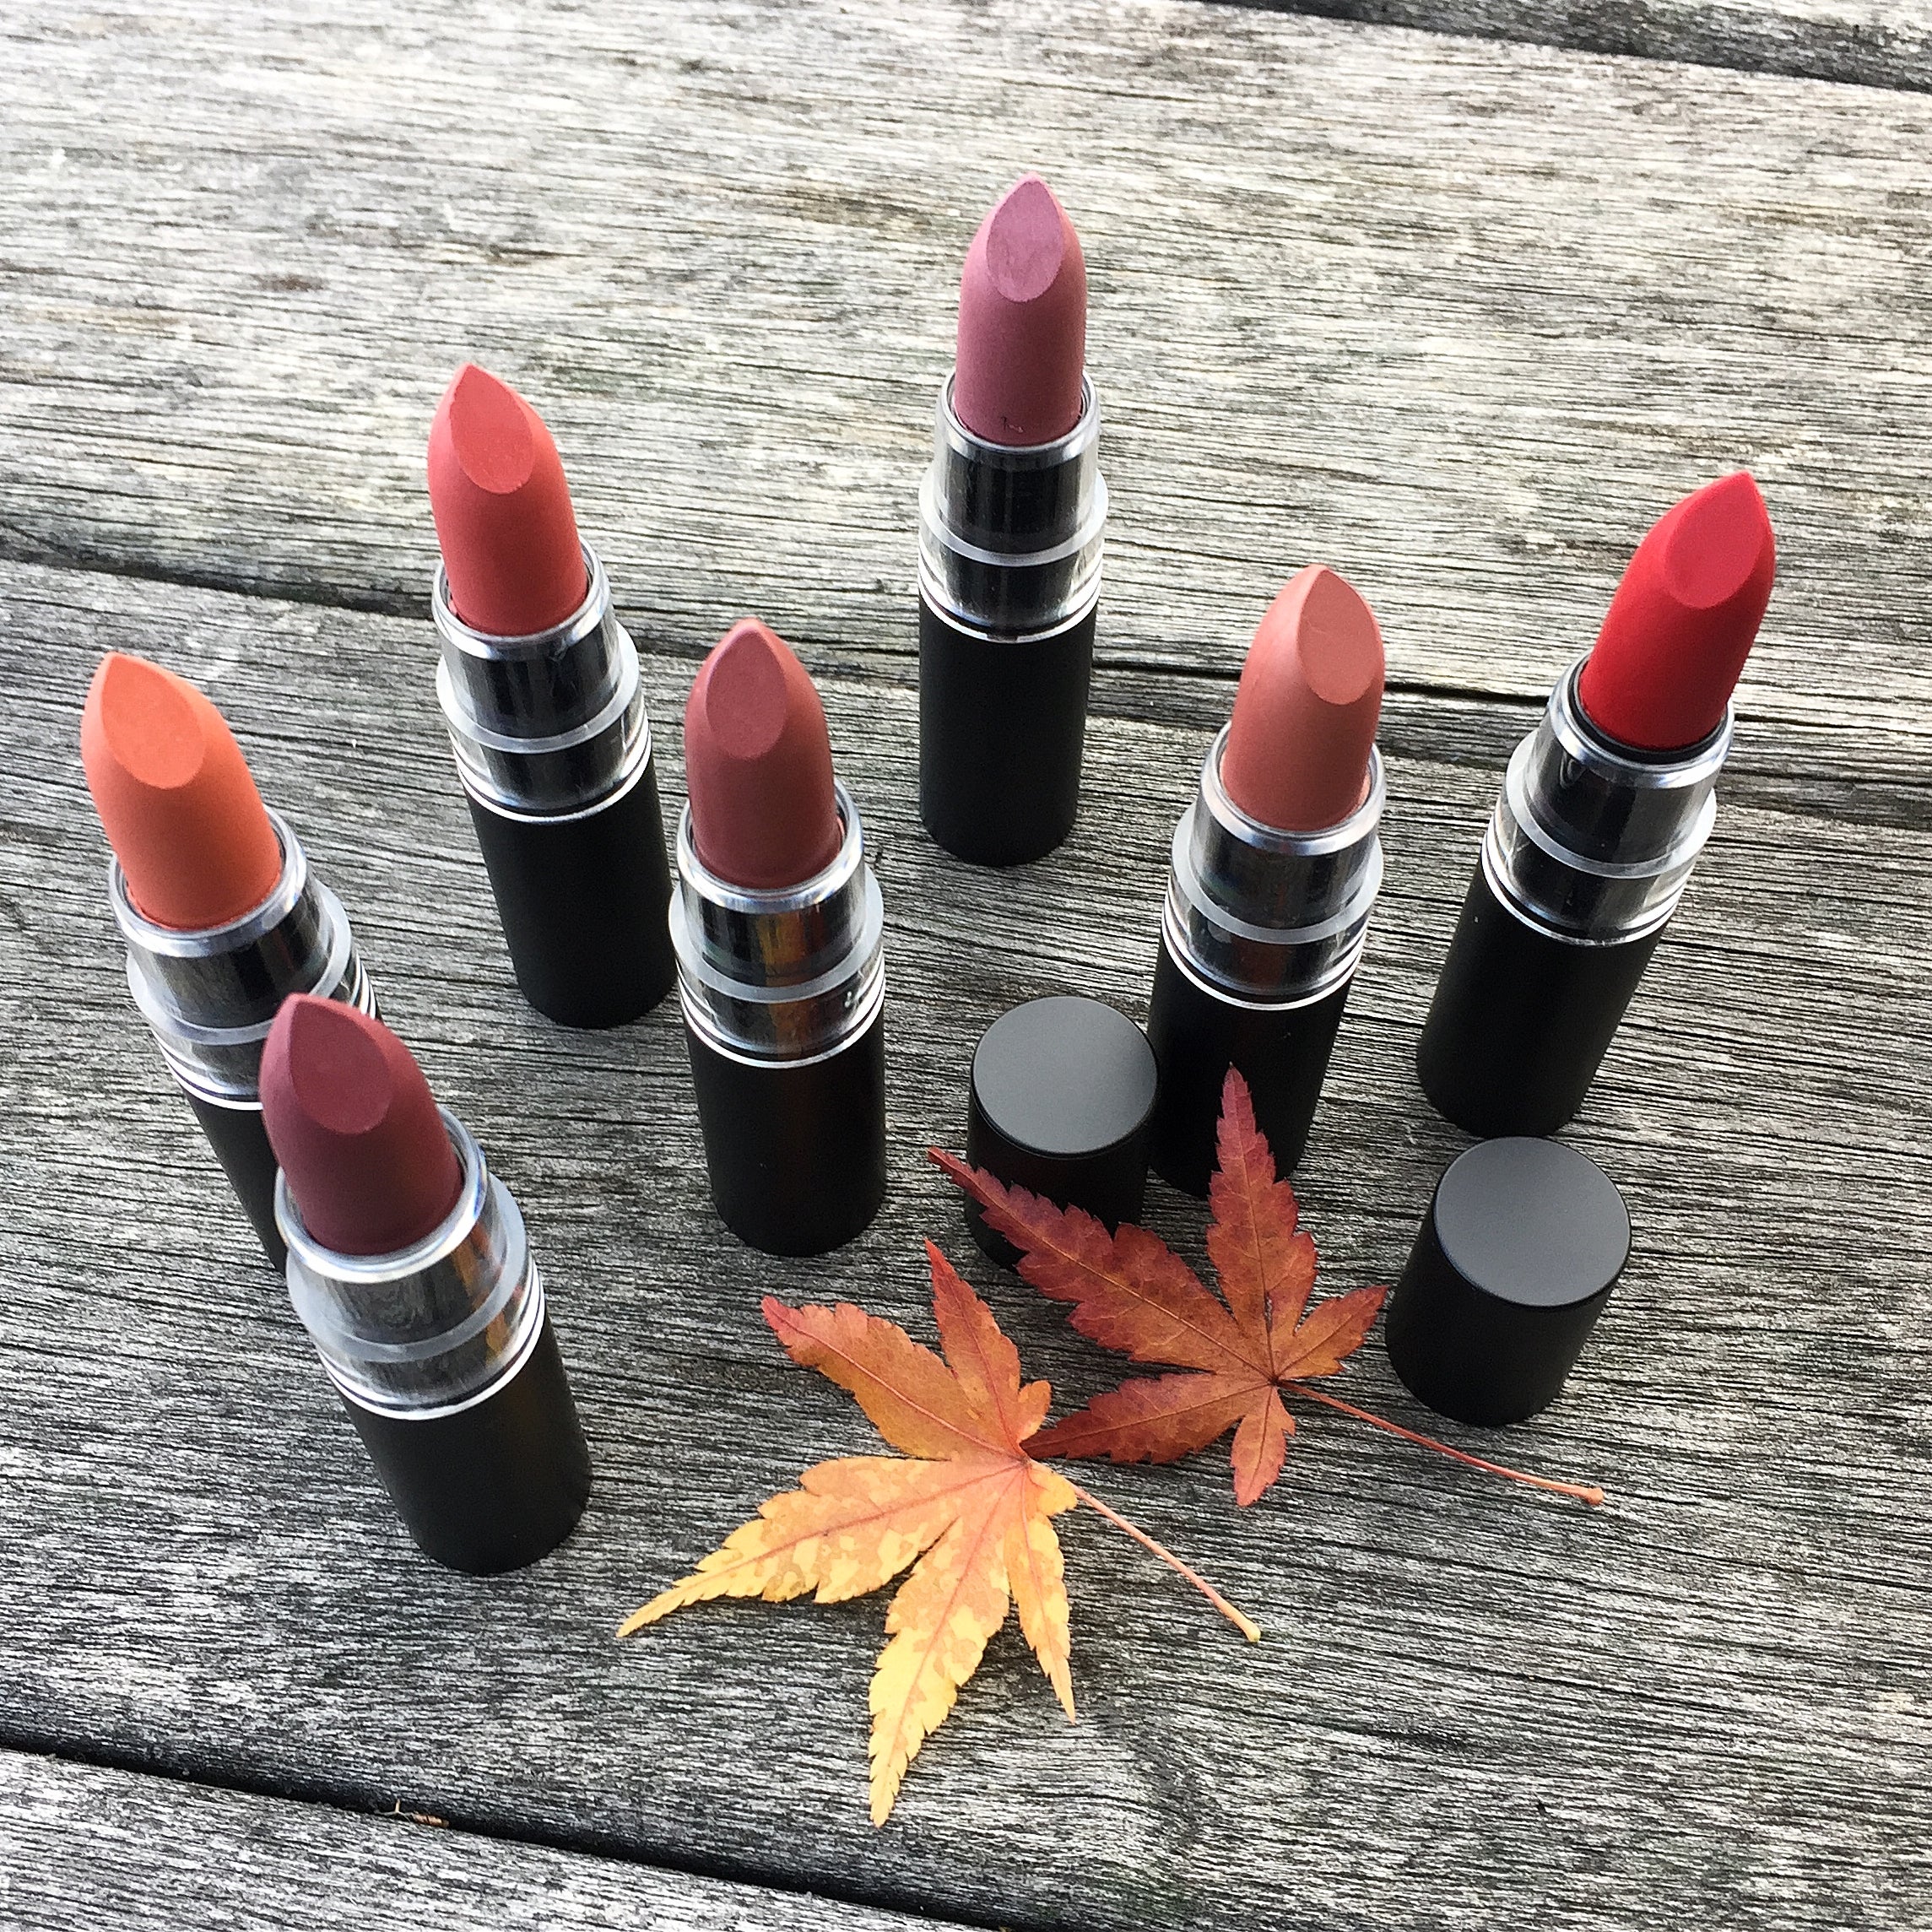 Organic Lipstick - Barely There